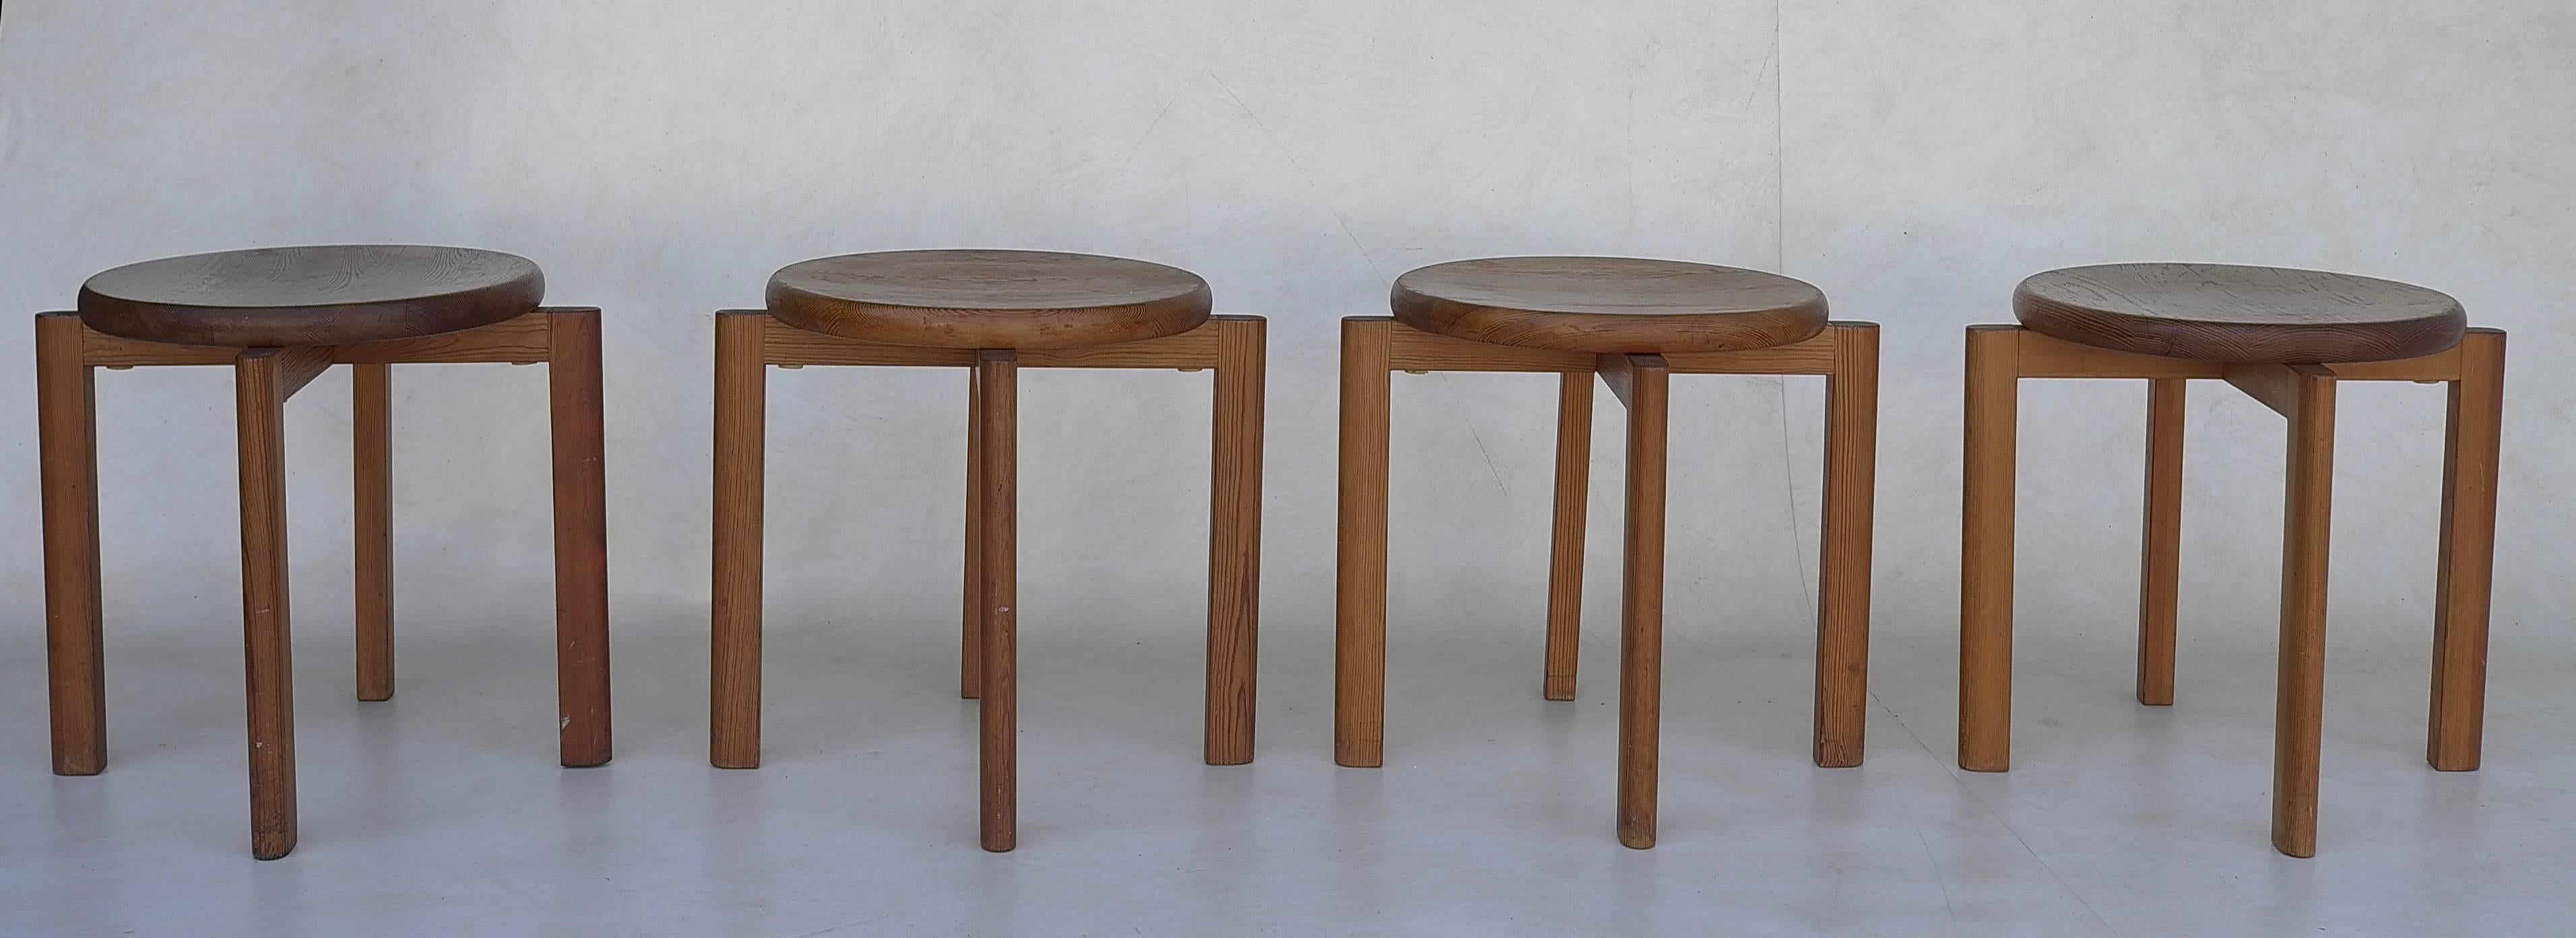 Scandinavian Stackable pine stools. Very well made, solid pinewood.